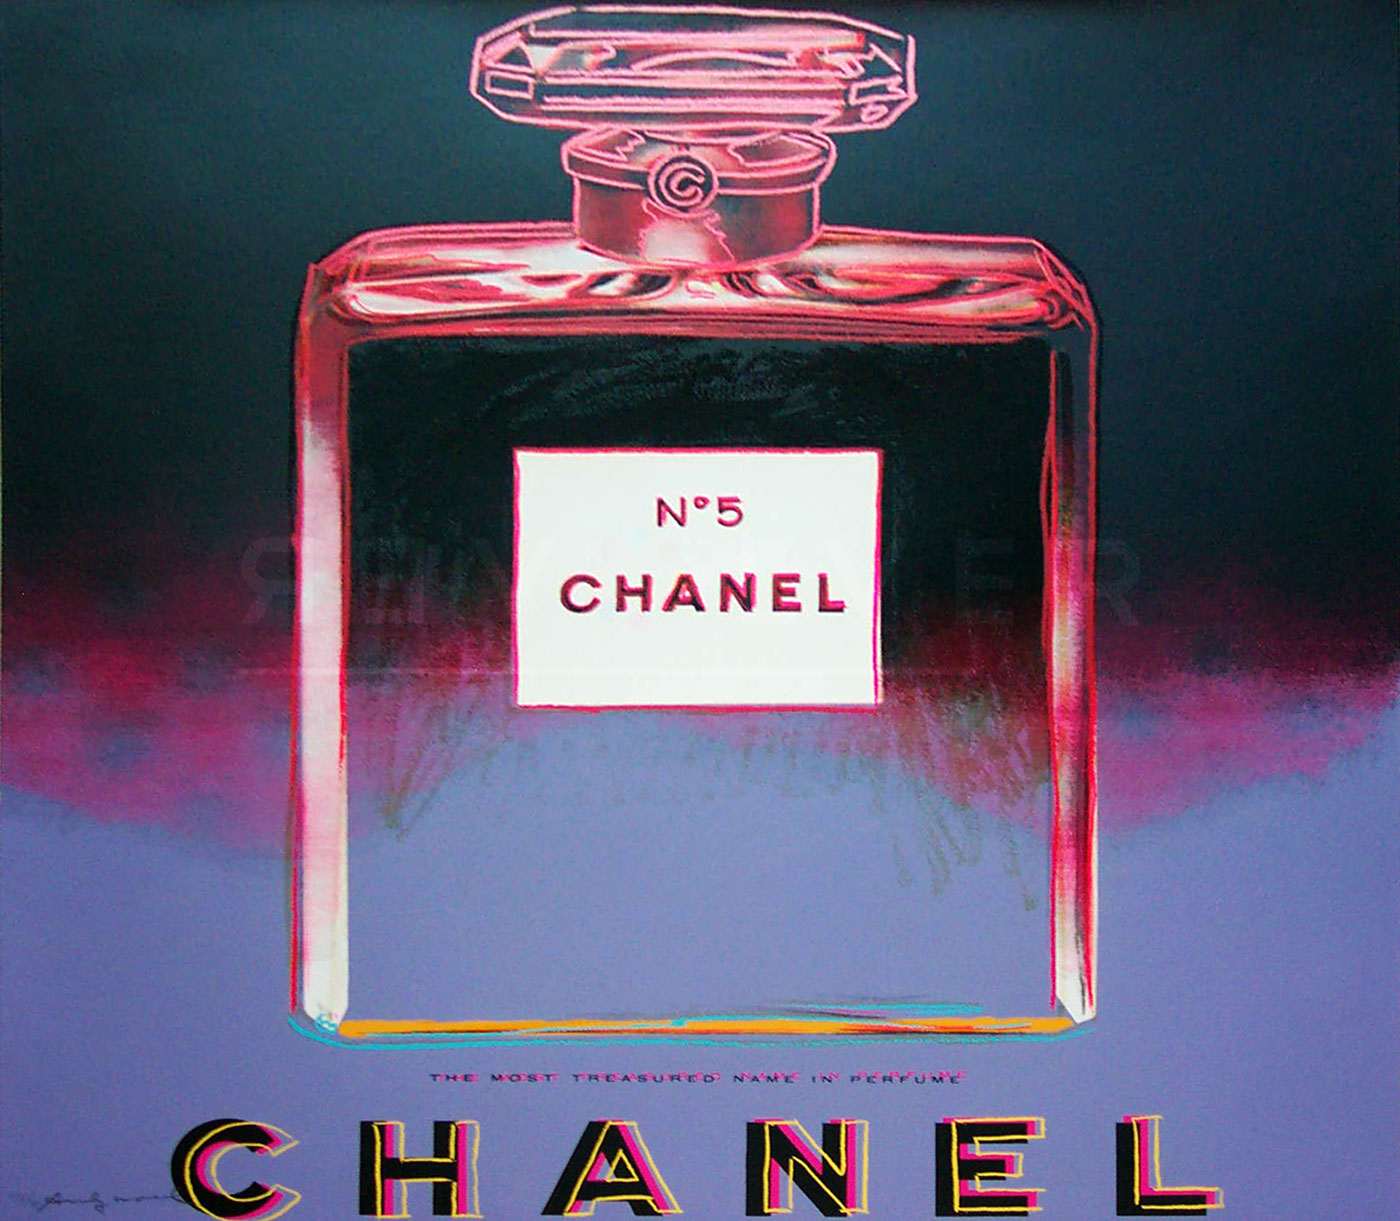 Chanel by Andy Warhol at